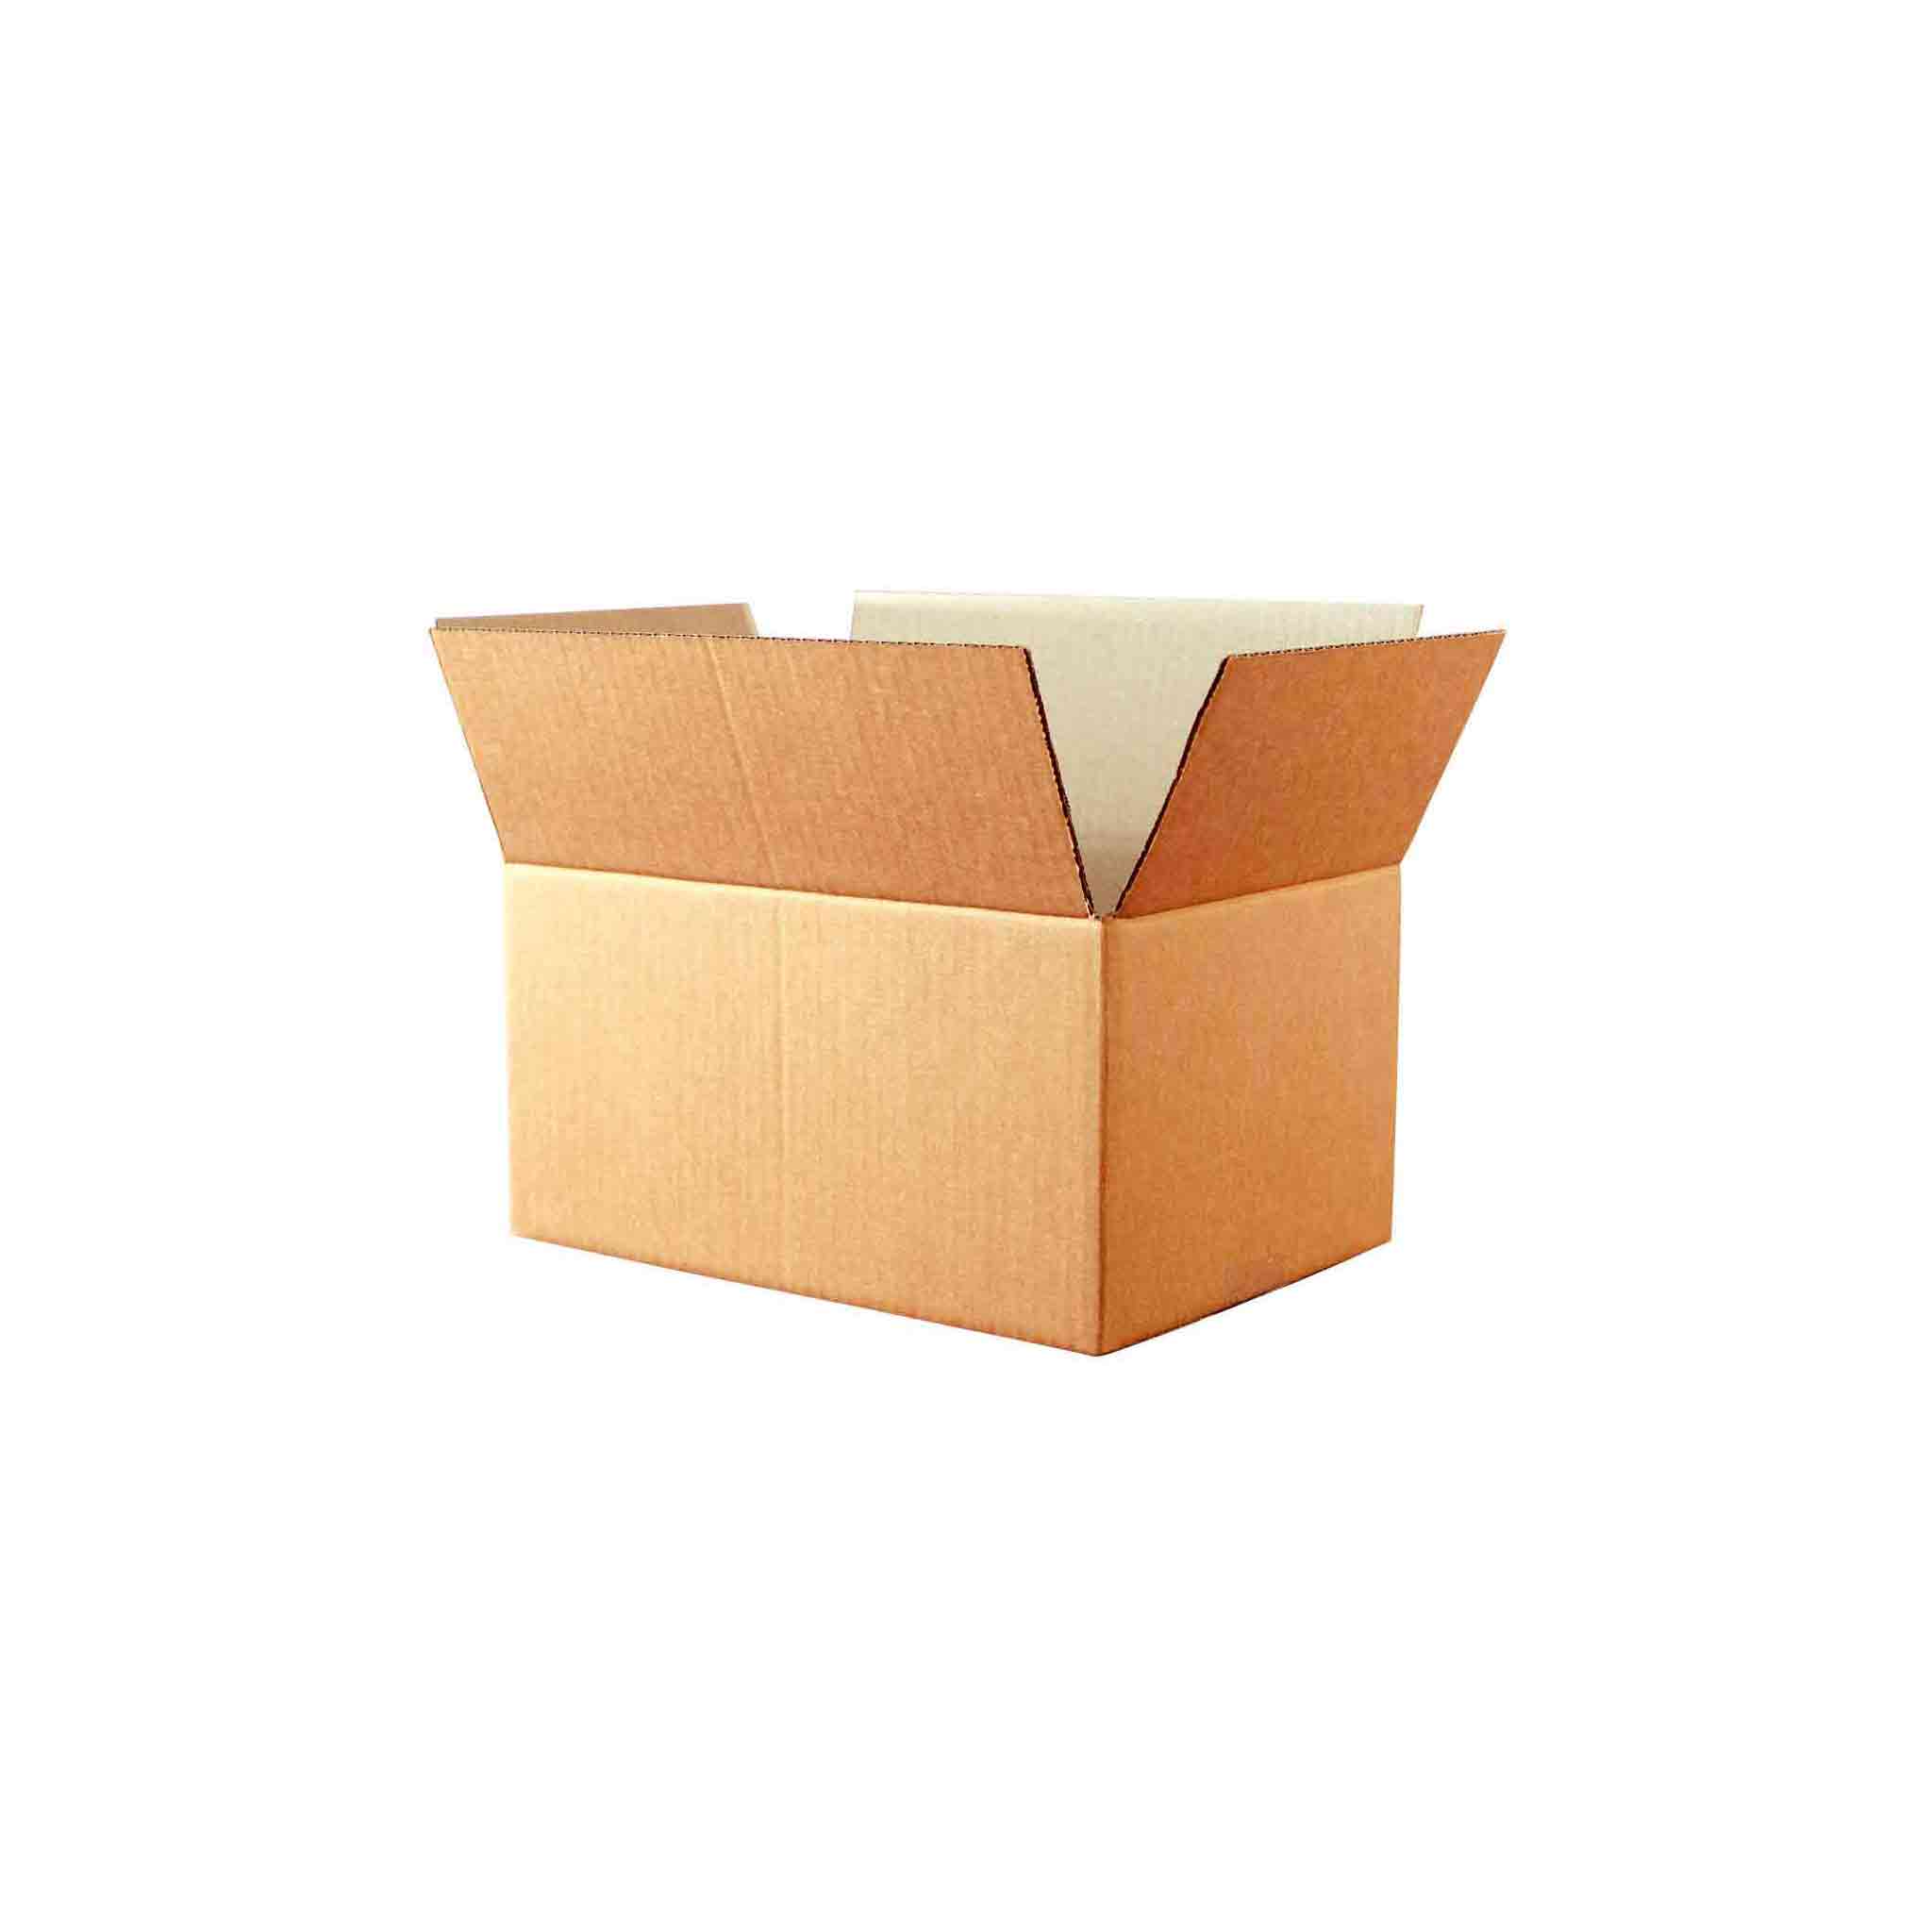 This box is lightweight, durable and made from 100% recyclable corrugated cardboard